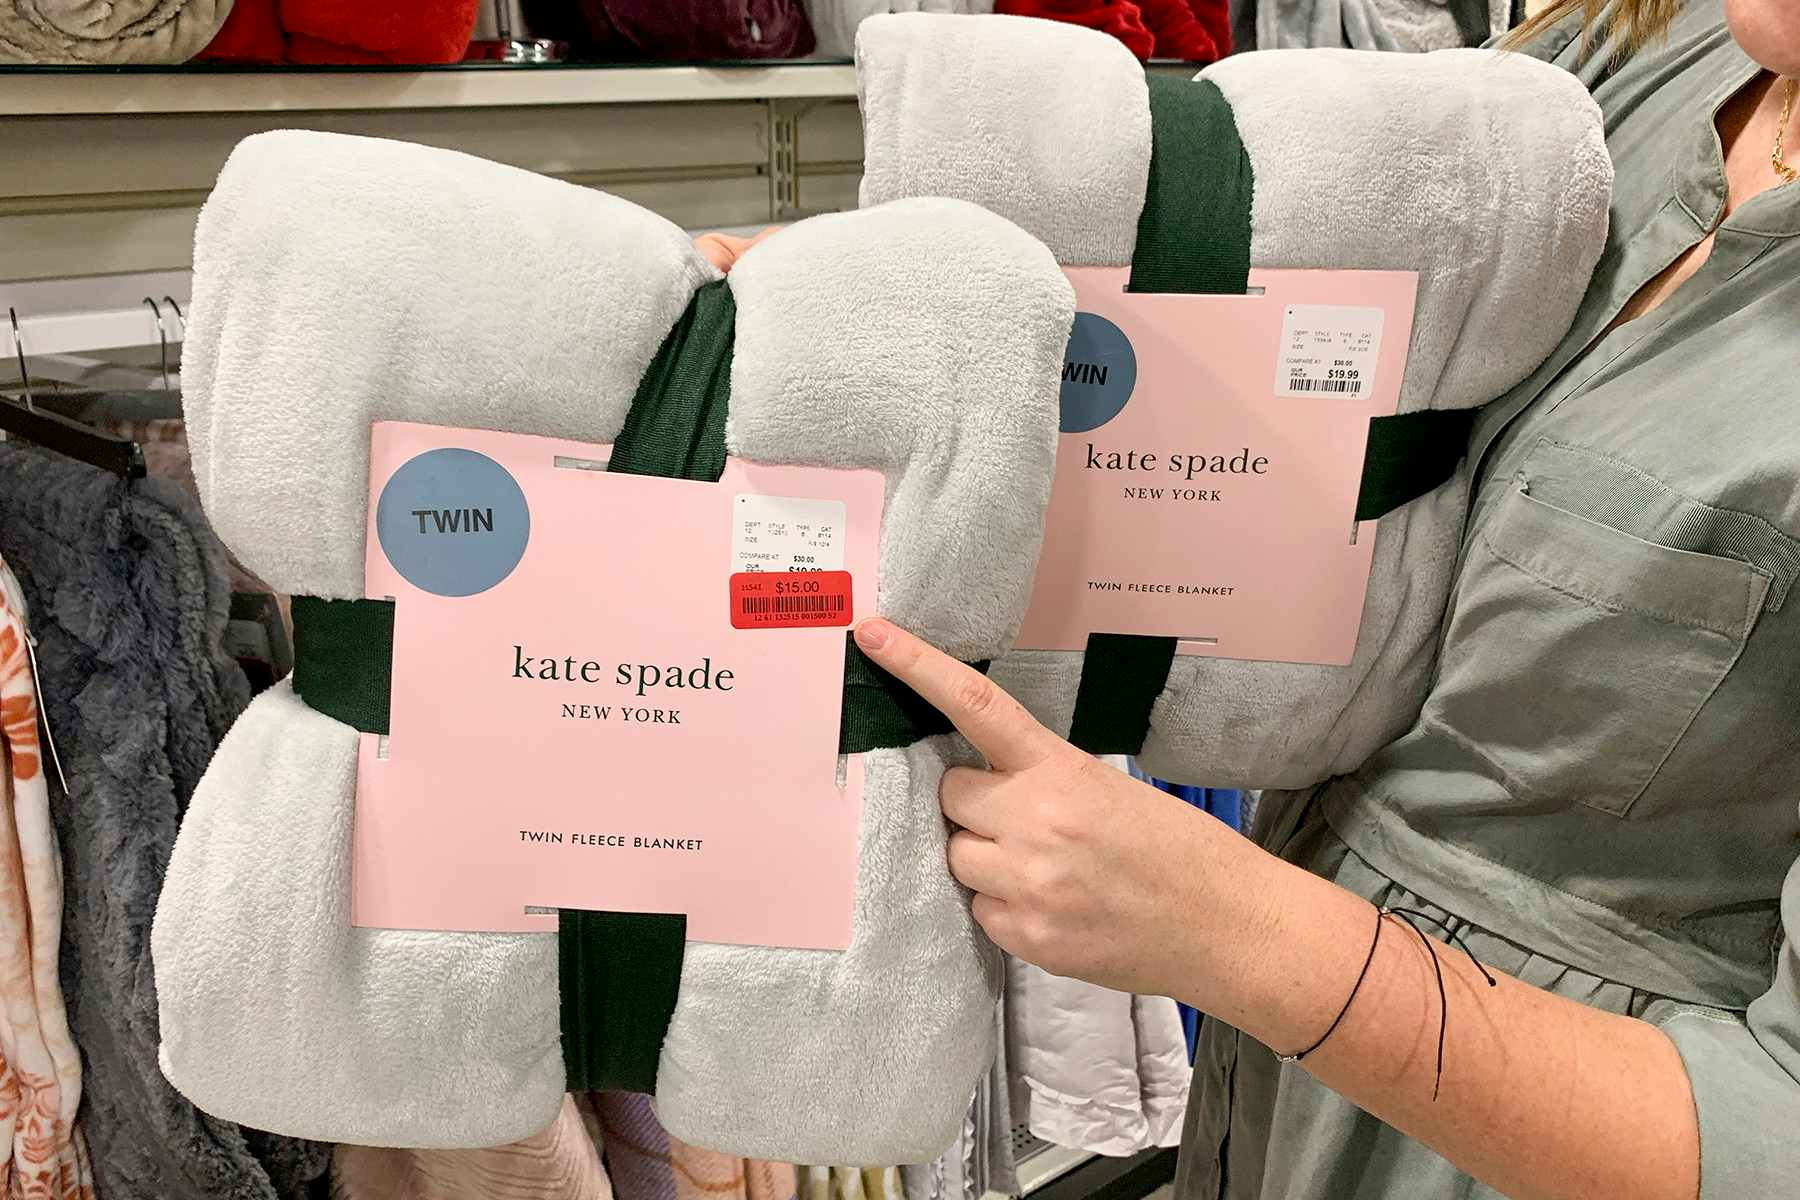 I can't believe I found this UGG towel at T.J. maxx on clearance